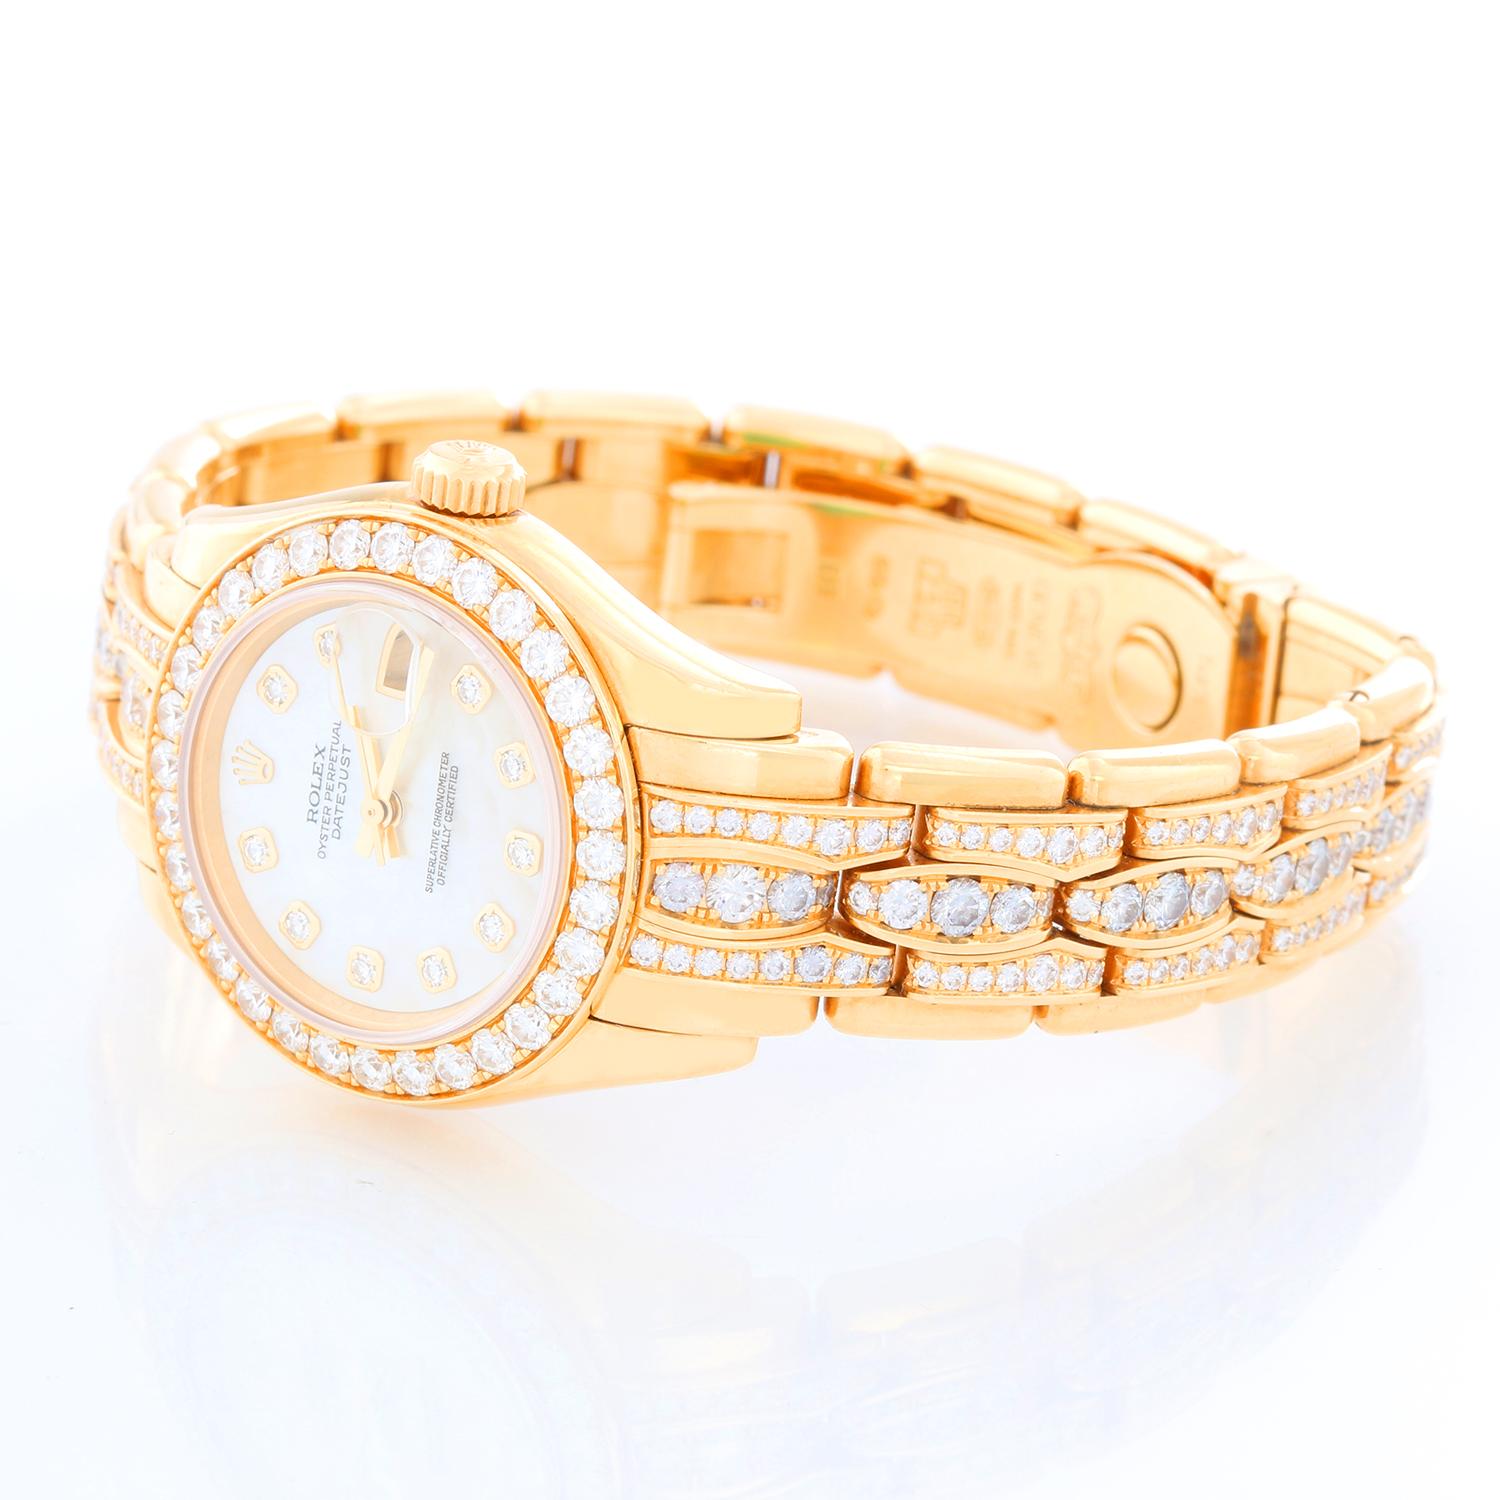 Rolex Ladies Masterpiece/Pearlmaster Gold Mother of Pearl Diamond Watch 80298/ 69298 - Automatic winding, 31 jewels, Quickset, sapphire crystal. 18k yellow gold case with factory 32 diamond bezel (29mm diameter). Genuine Rolex Mother-of-Pearl dial